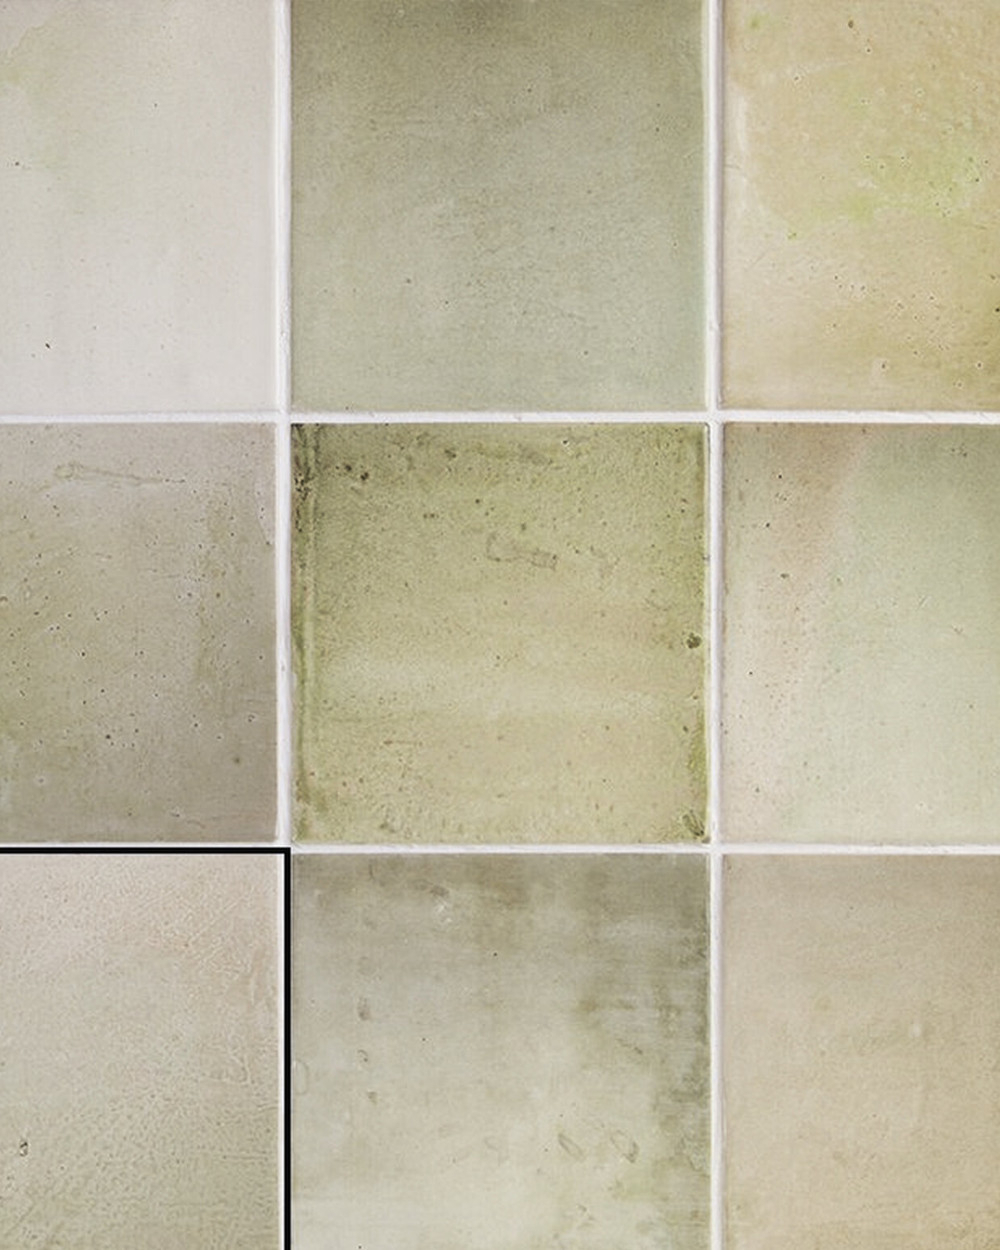 Small wall tiles bathroom | kitchen tiles square | Sintra Sand 12.4x12.4 cm